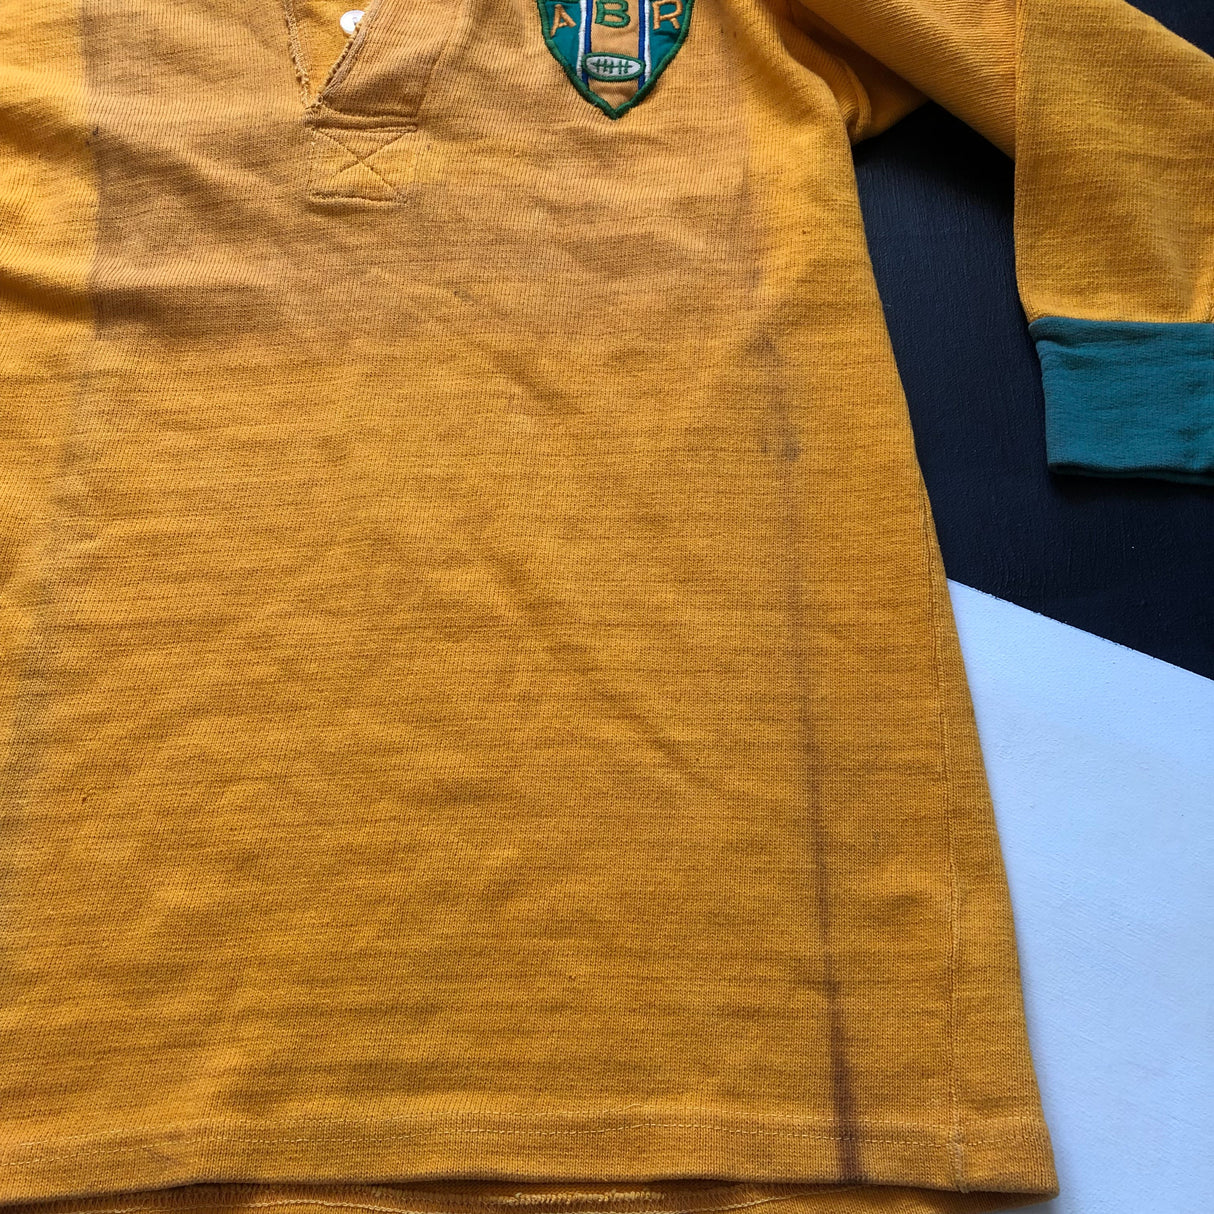 Brazil National Rugby Team Jersey 1970/80's Match Worn Underdog Rugby - The Tier 2 Rugby Shop 